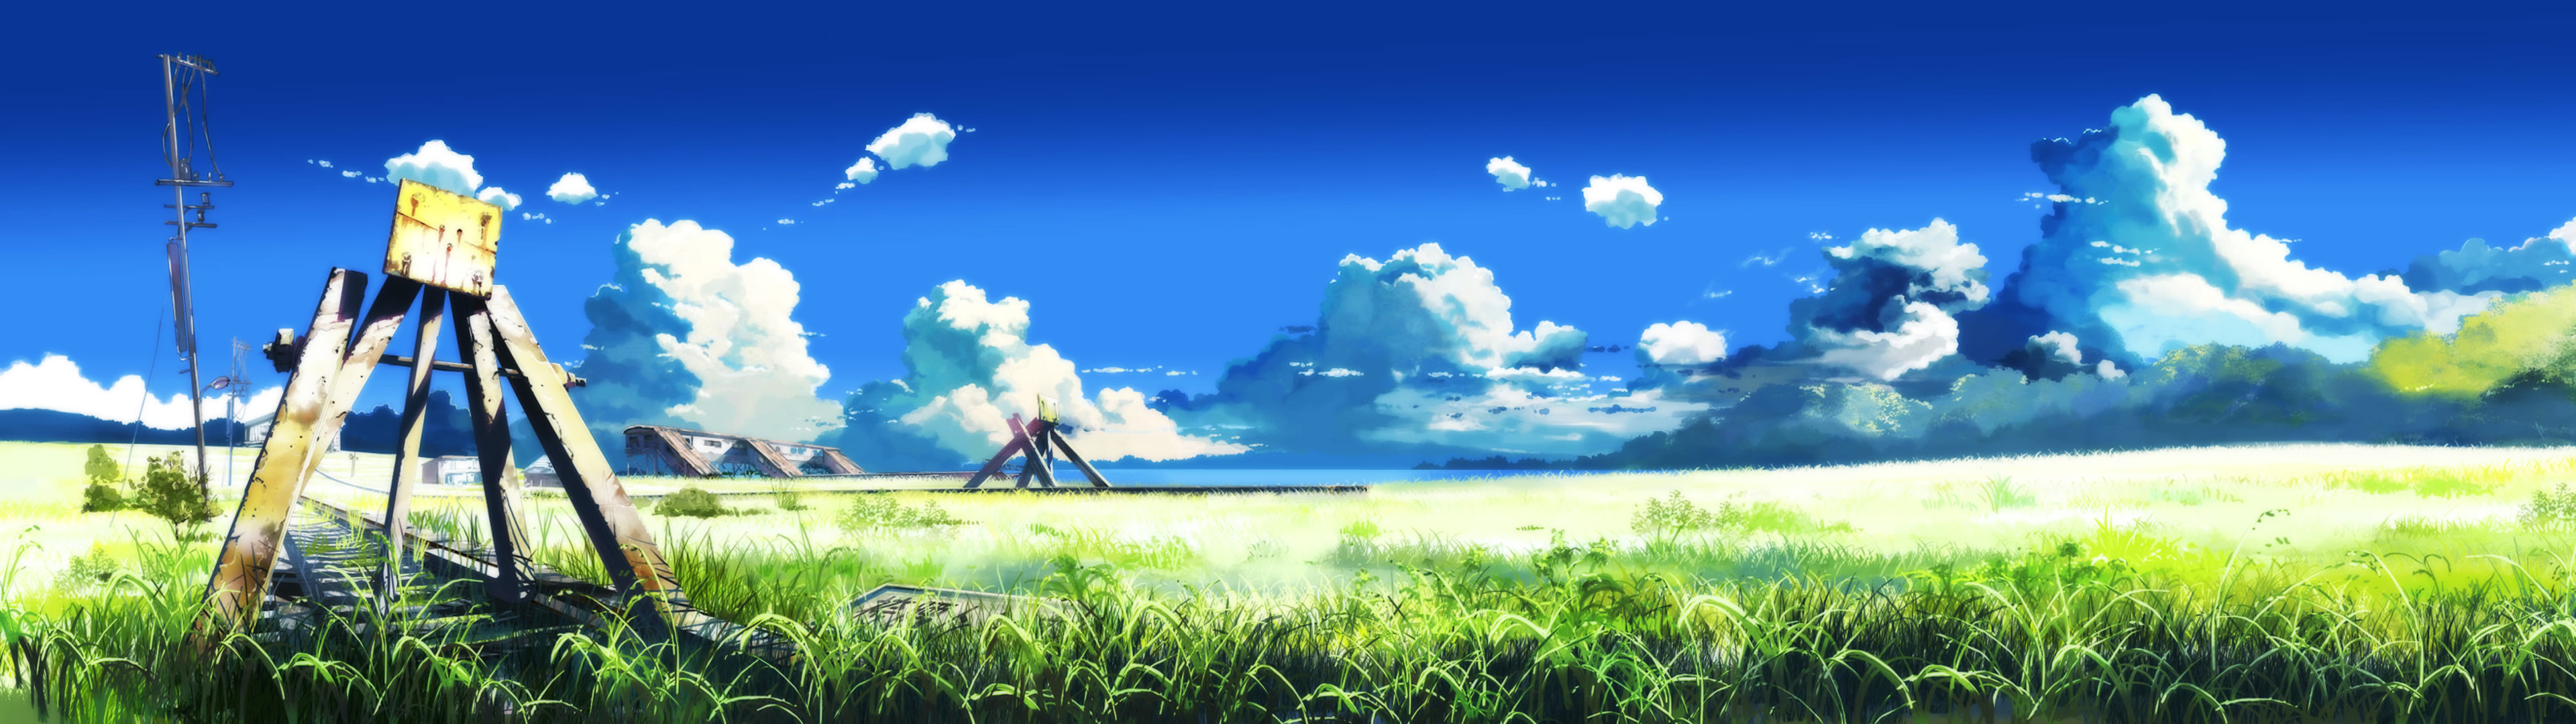 Anime Wallpaper 3840x1080 72 Images